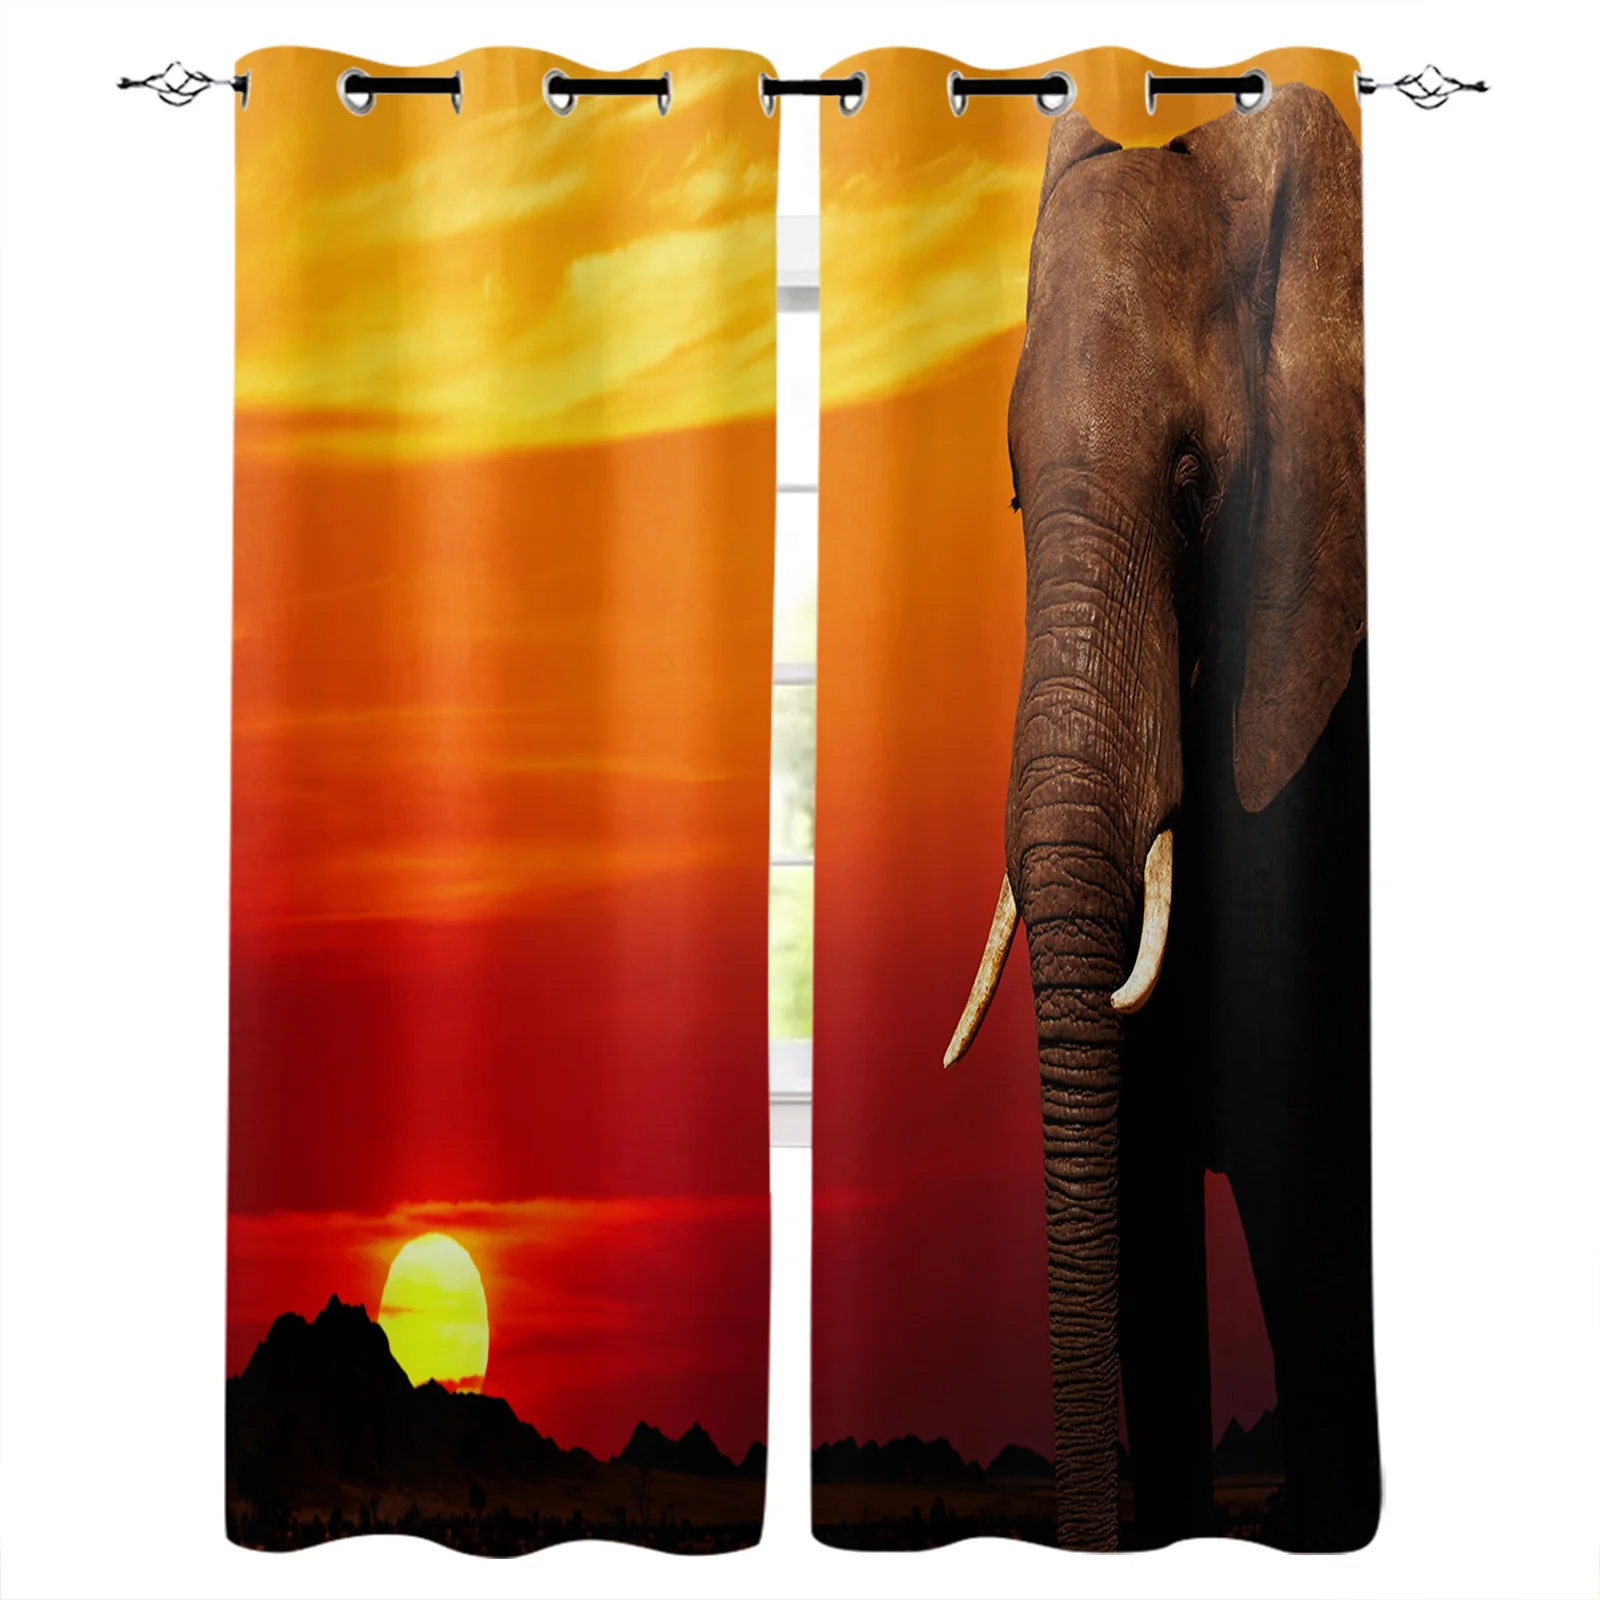 

African Animal Elephant Sunrise Blackout Curtains Window Curtains For Bedroom Living Room Decor Window Treatments